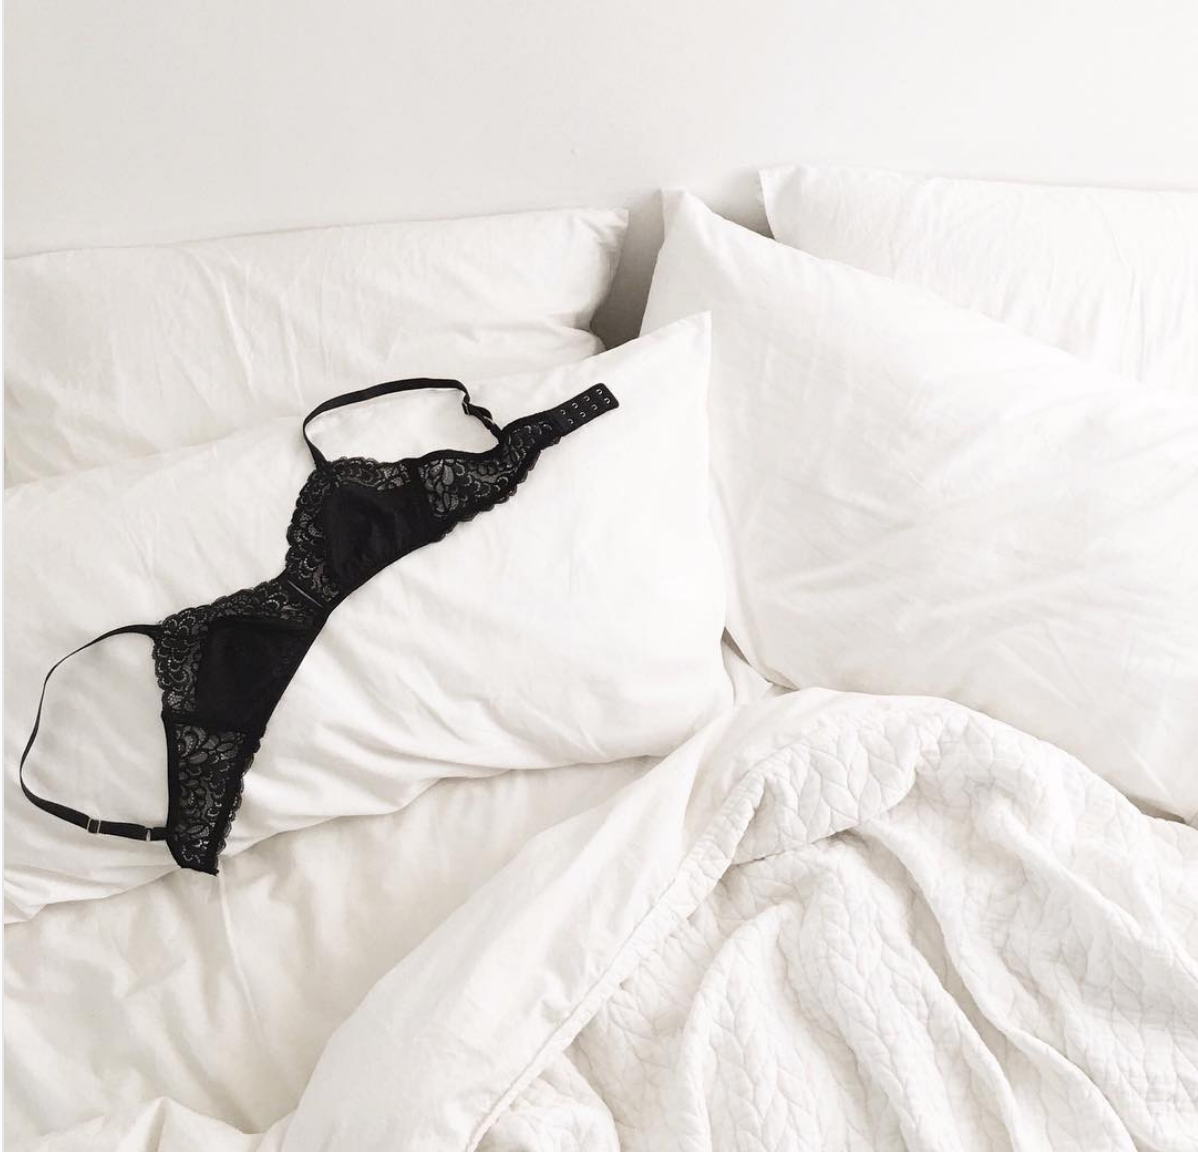 The Prettiest Lingerie Gifts for the Bride-to-Be